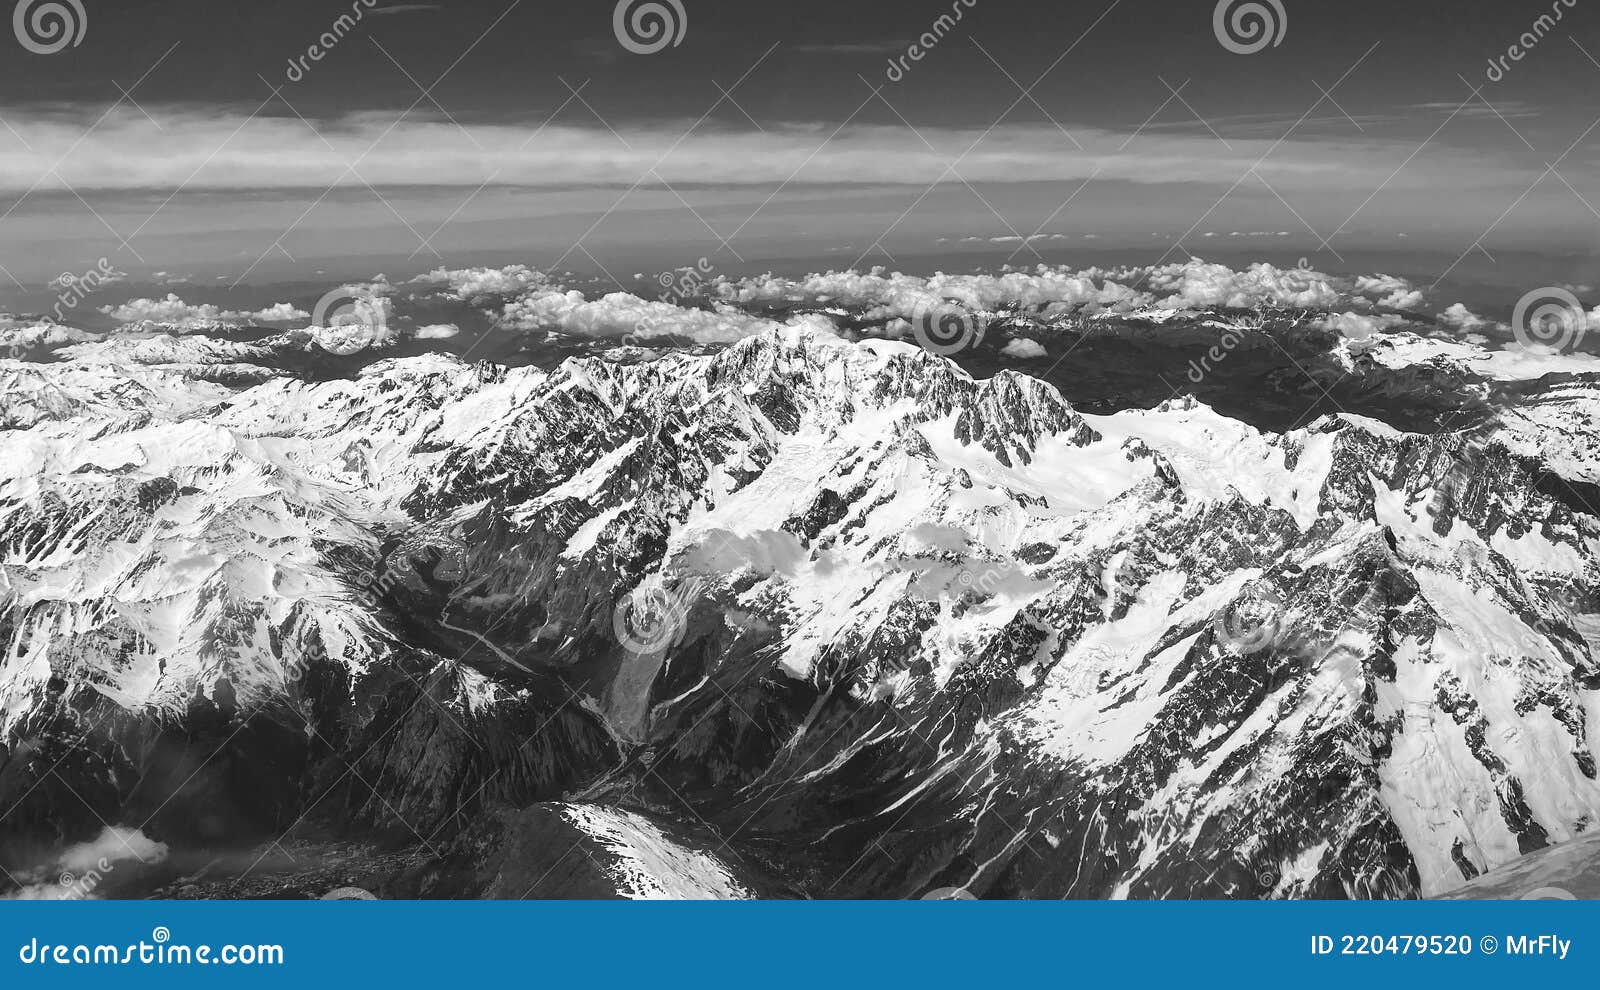 alps mountainrange from above, black and white